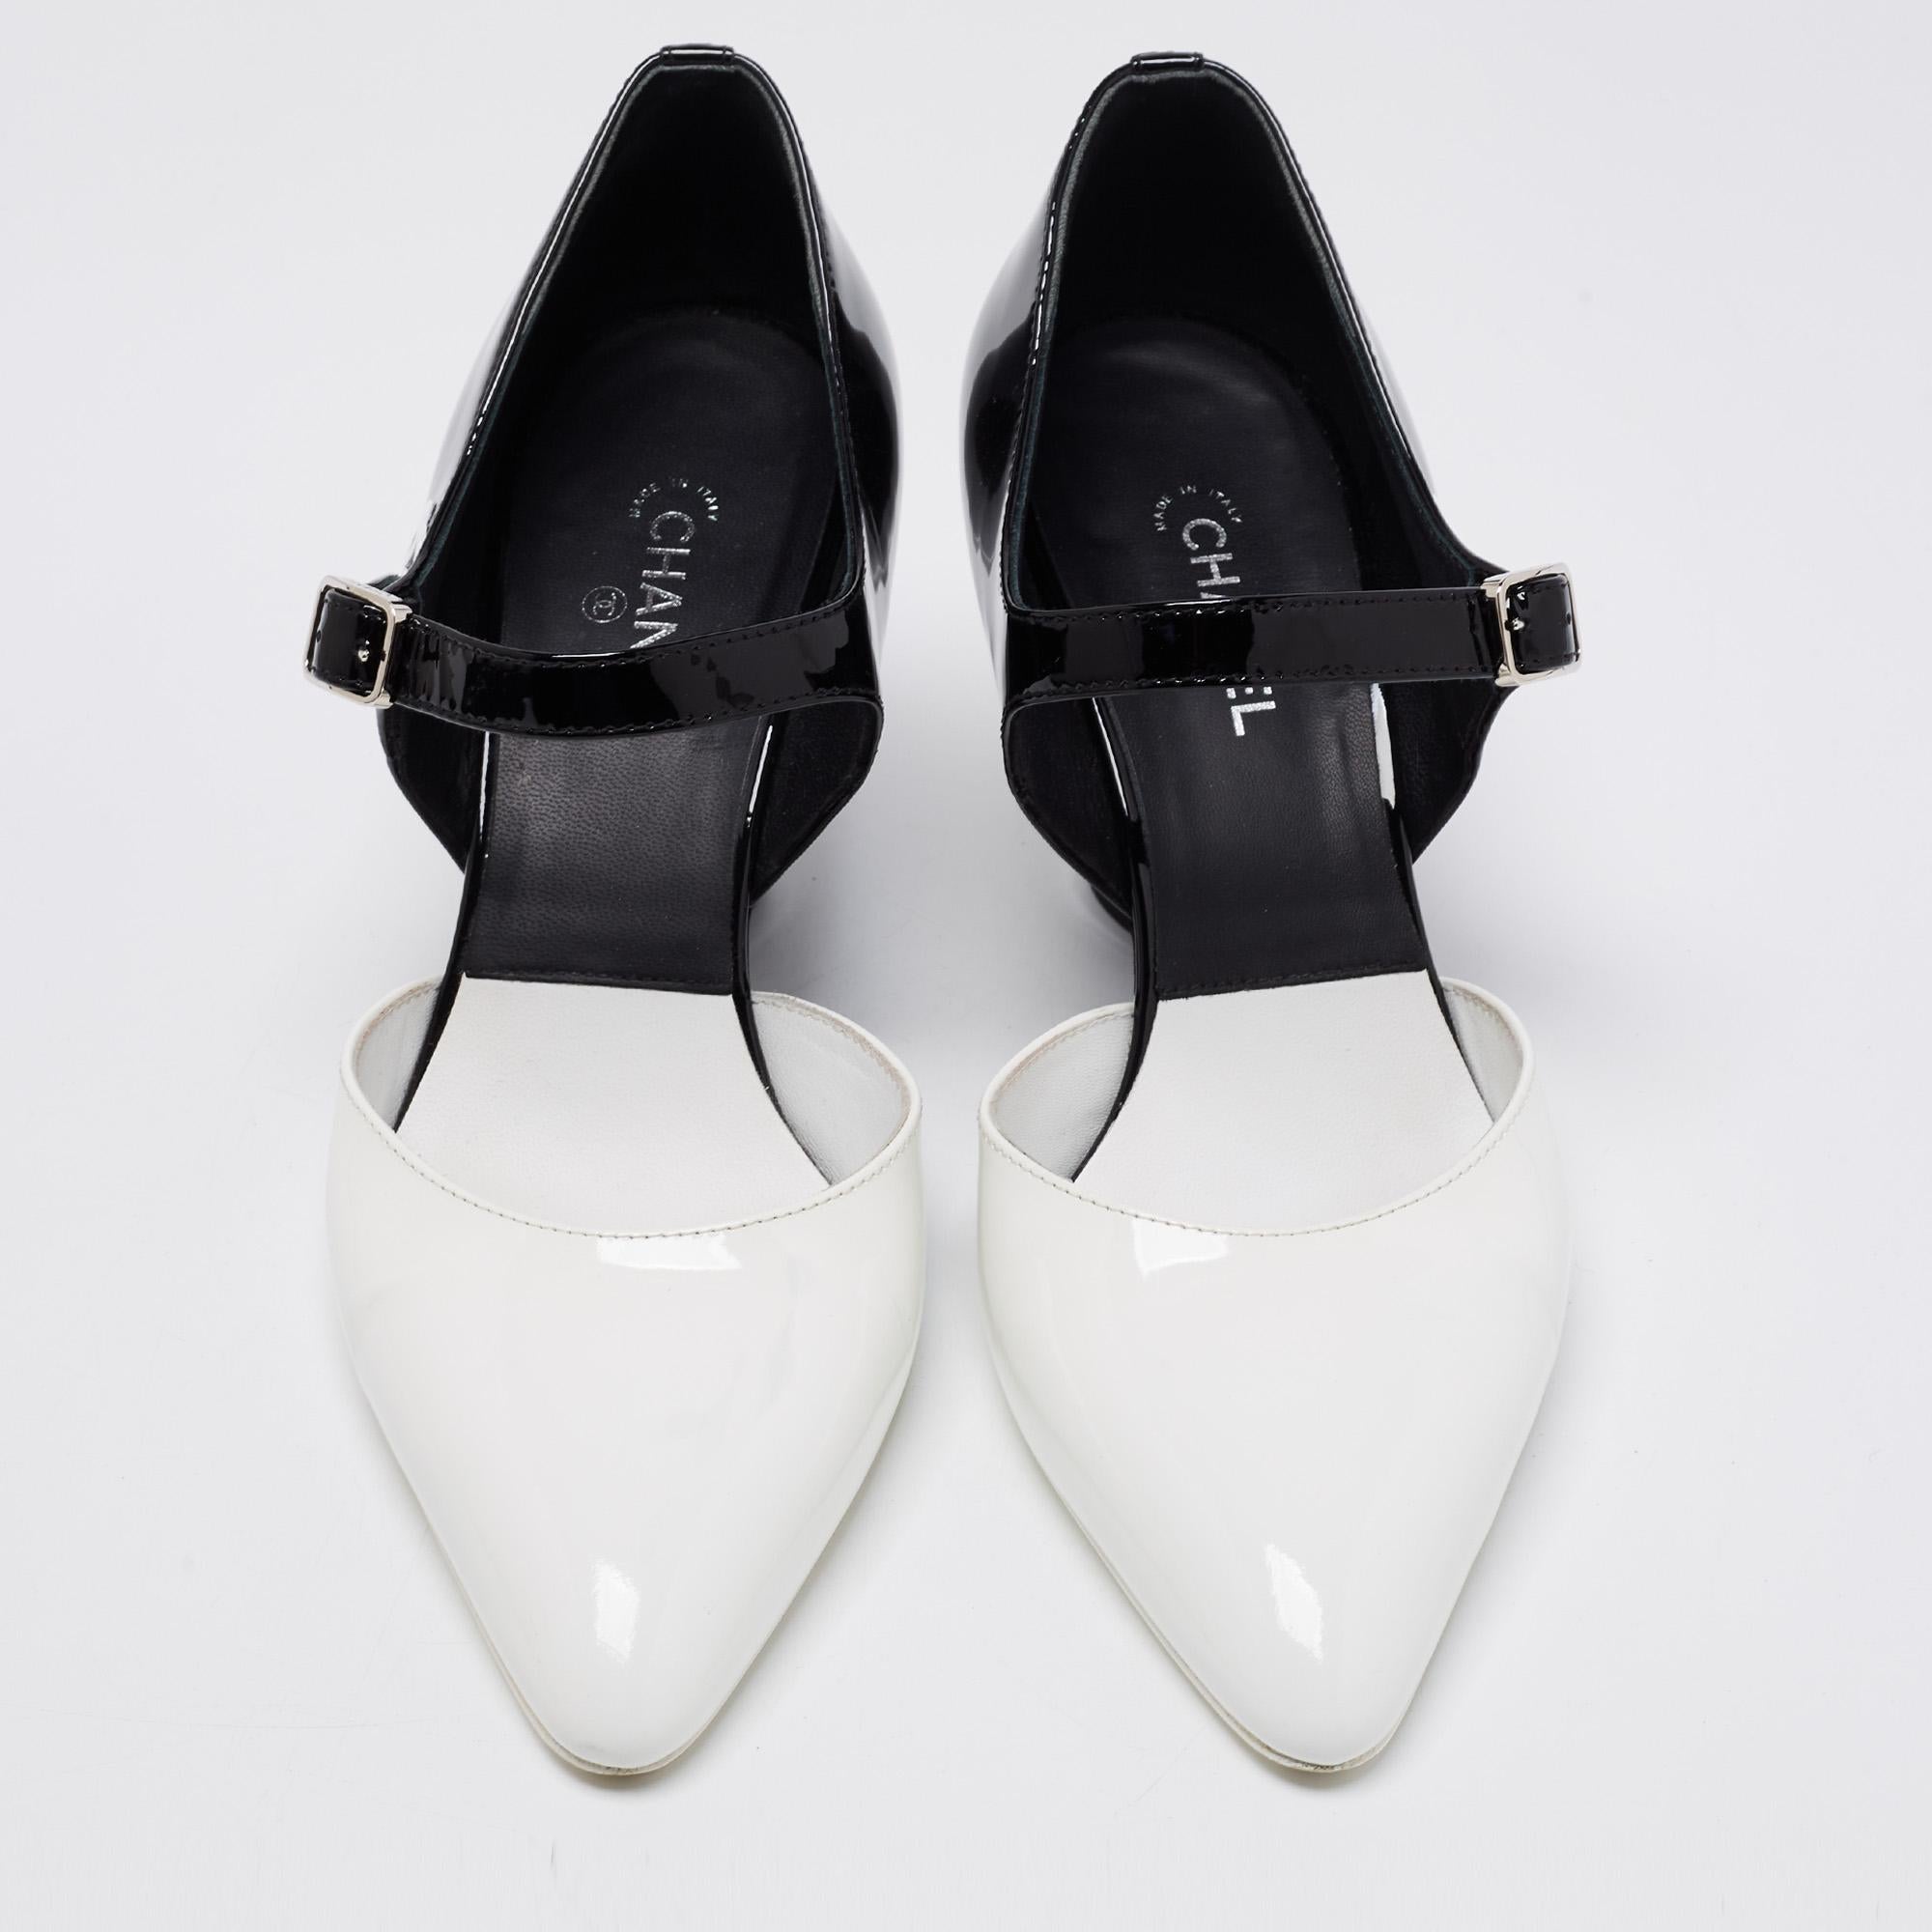 It's time to make way for some impressive and elegant steps in this pair of Chanel pumps. Created in a classy Mary Jane style, the pair features covered toes and ankle buckle closure. The 8cm heels offer these shoes a practical touch and the 'CC'